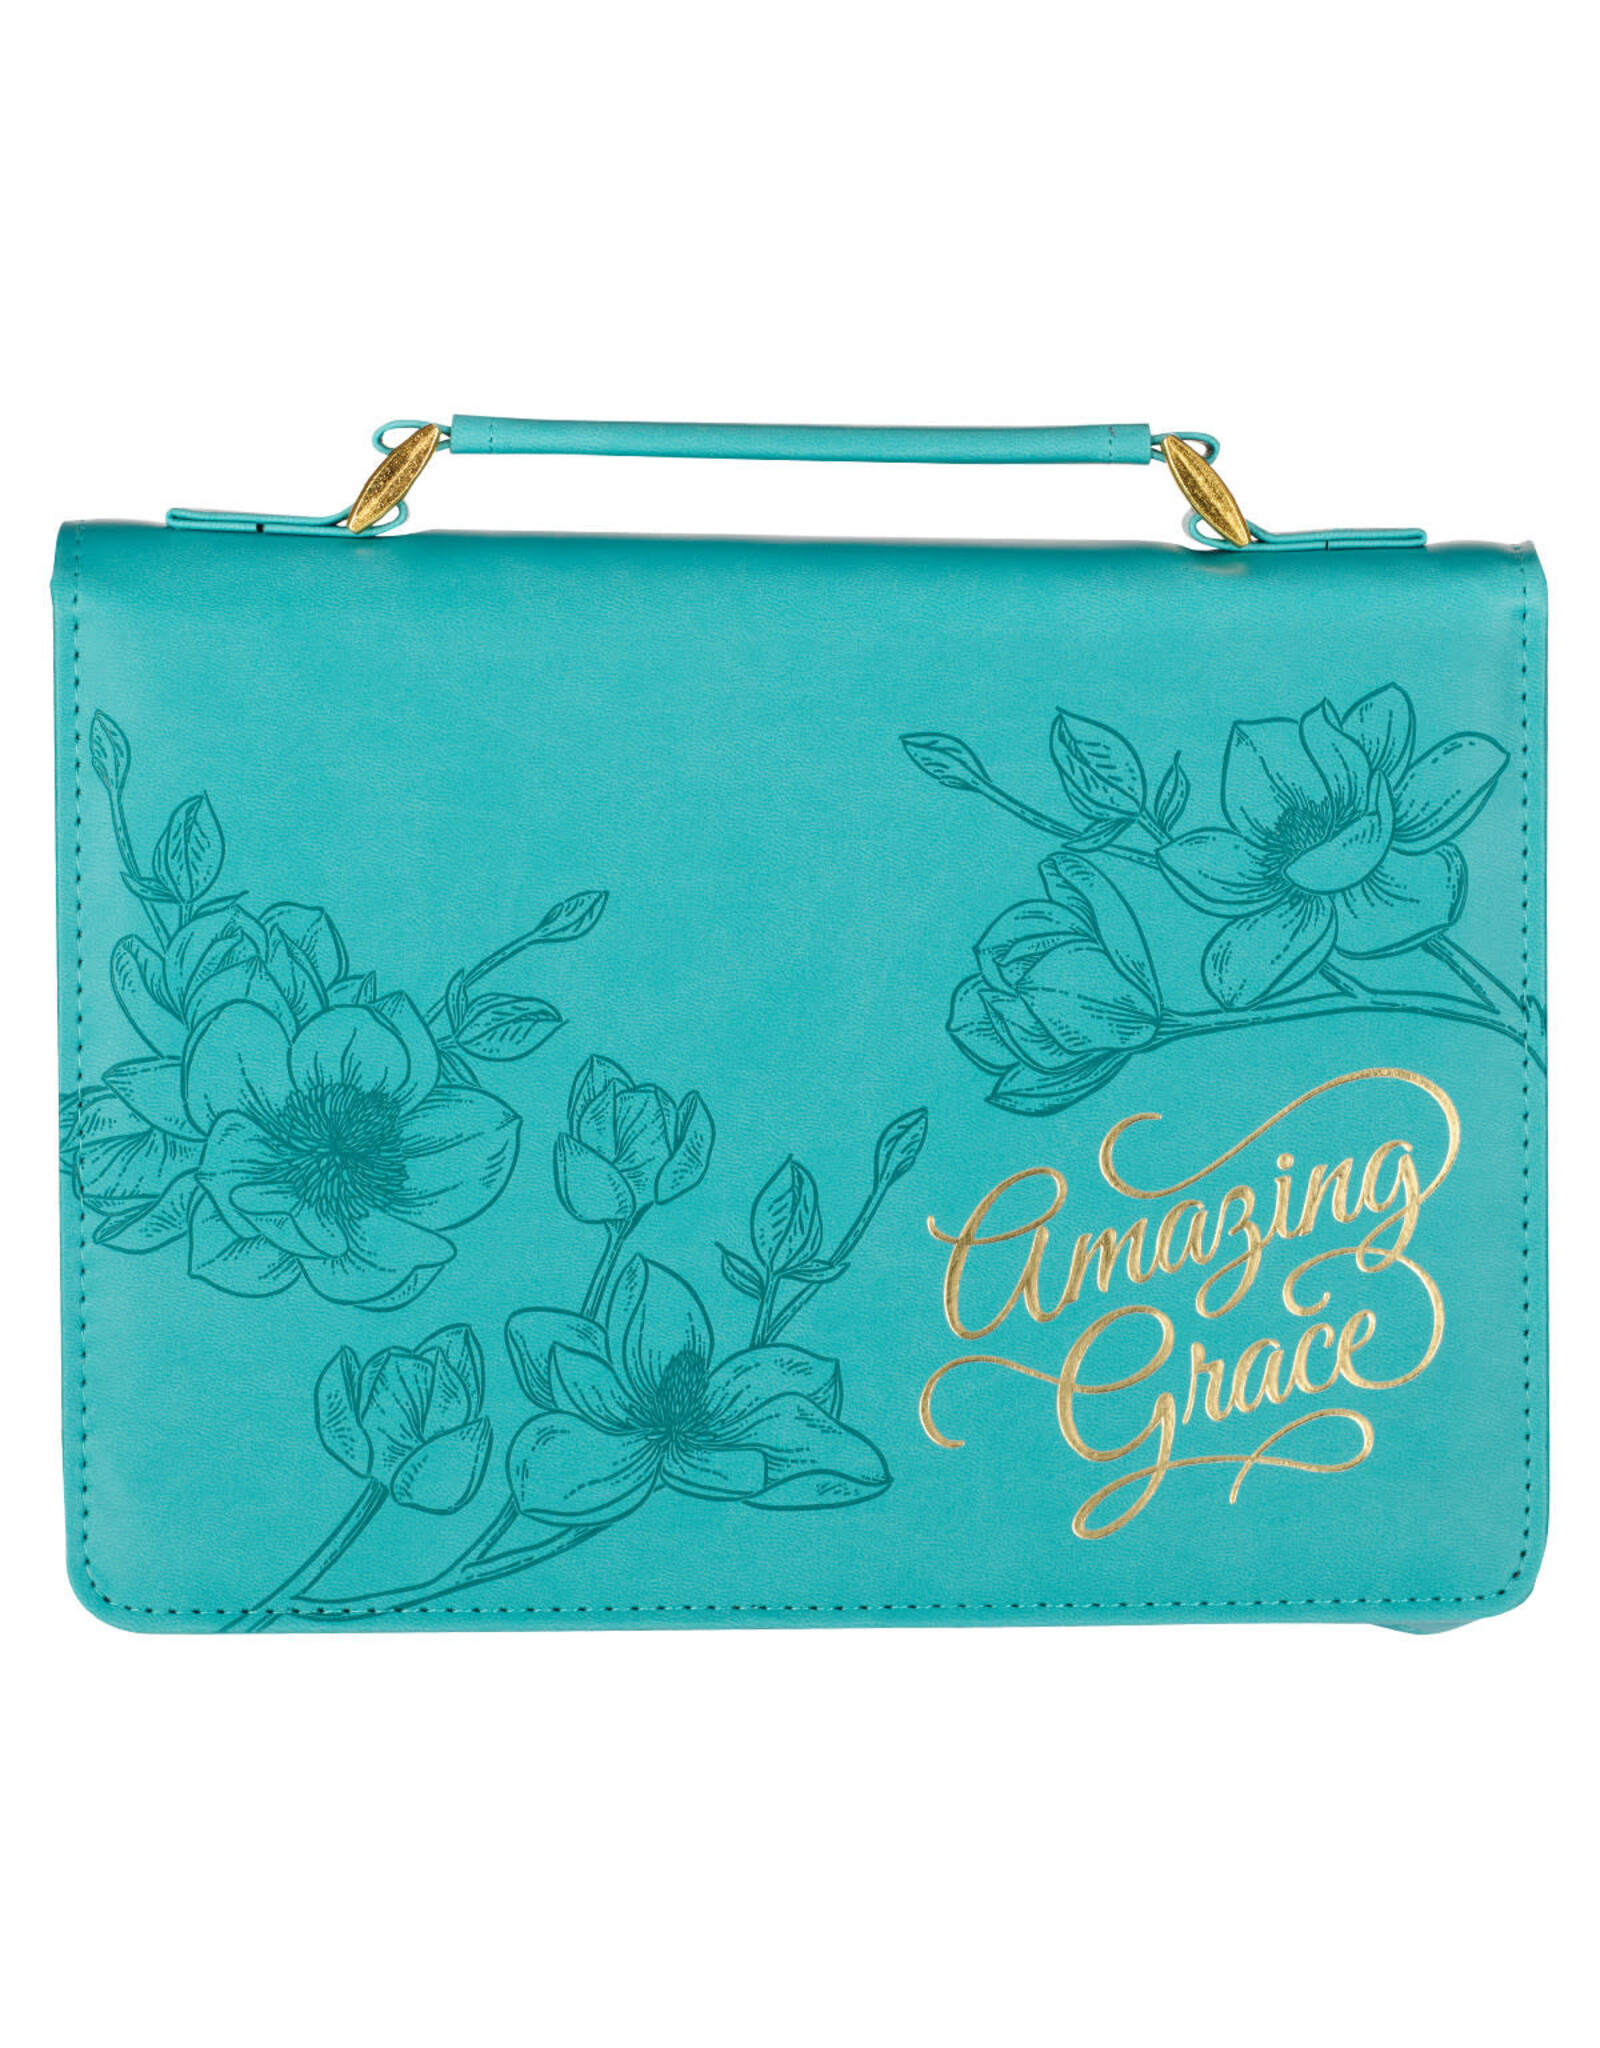 Christian Art Gifts Bible Cover - Amazing Grace, Floral Teal Faux Leather,